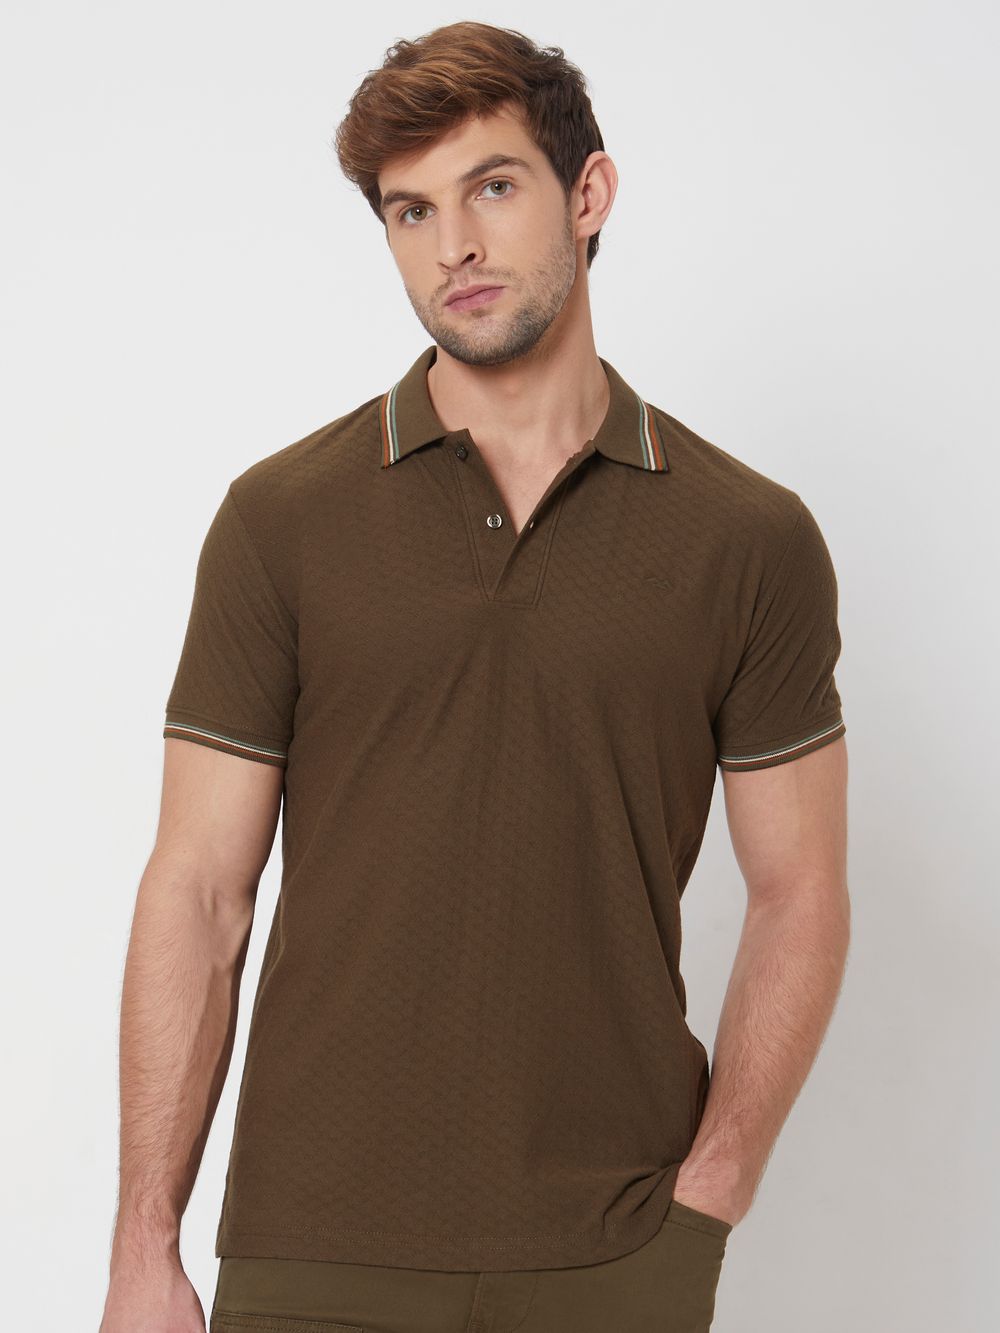 Olive Textured Tipped Collar Slim Fit Casual Polo